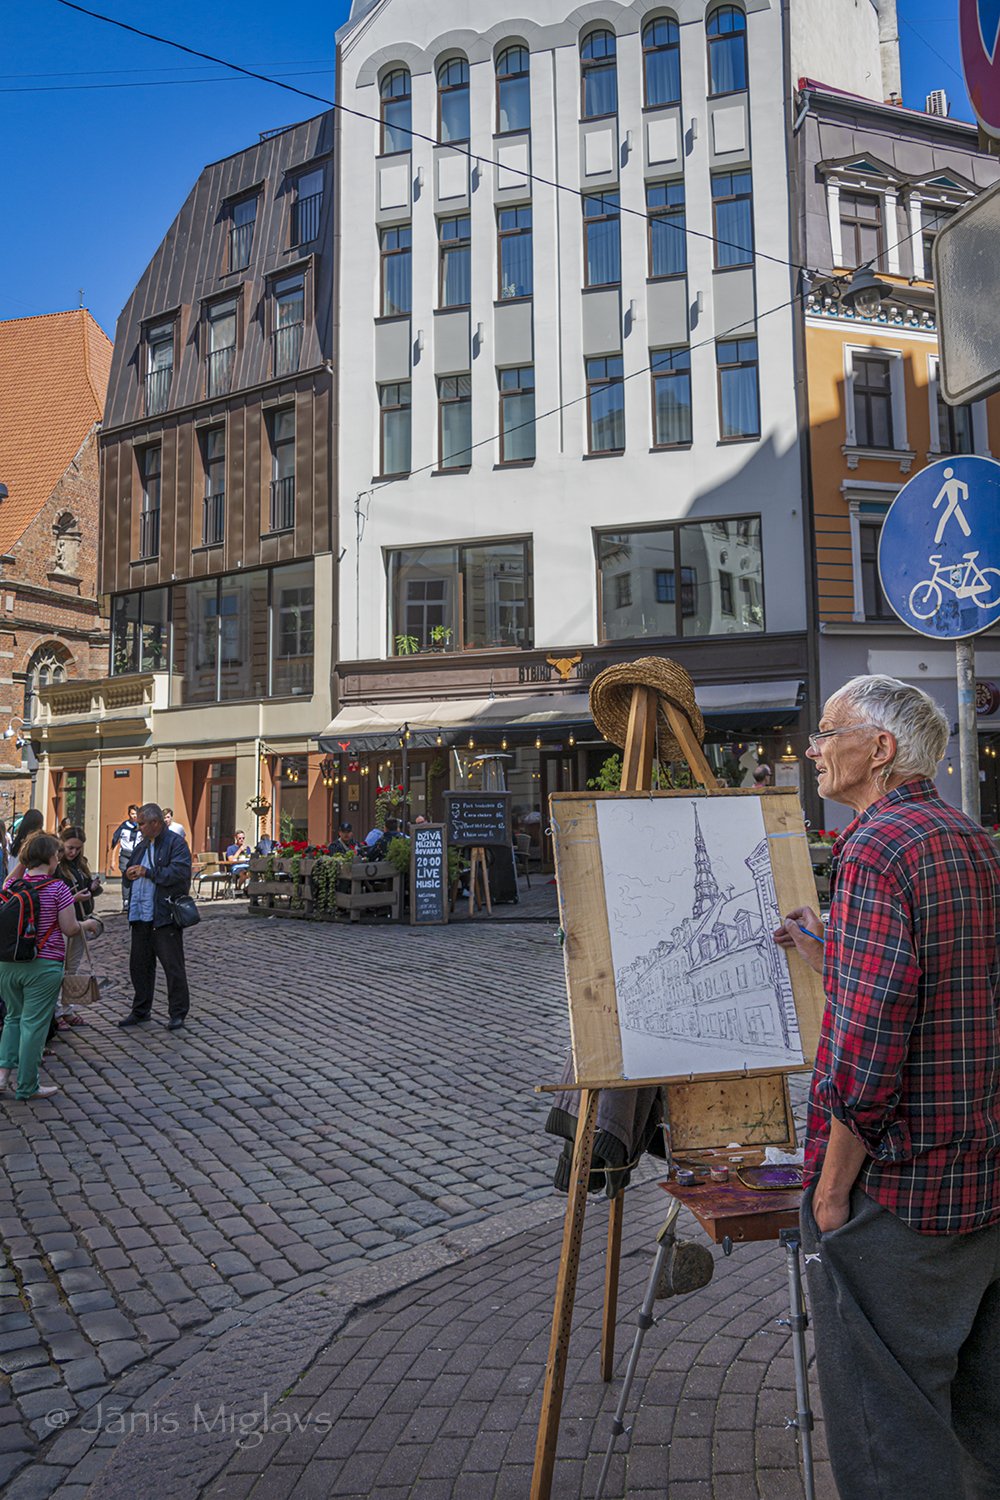 Artist inspired by Old Town Riga